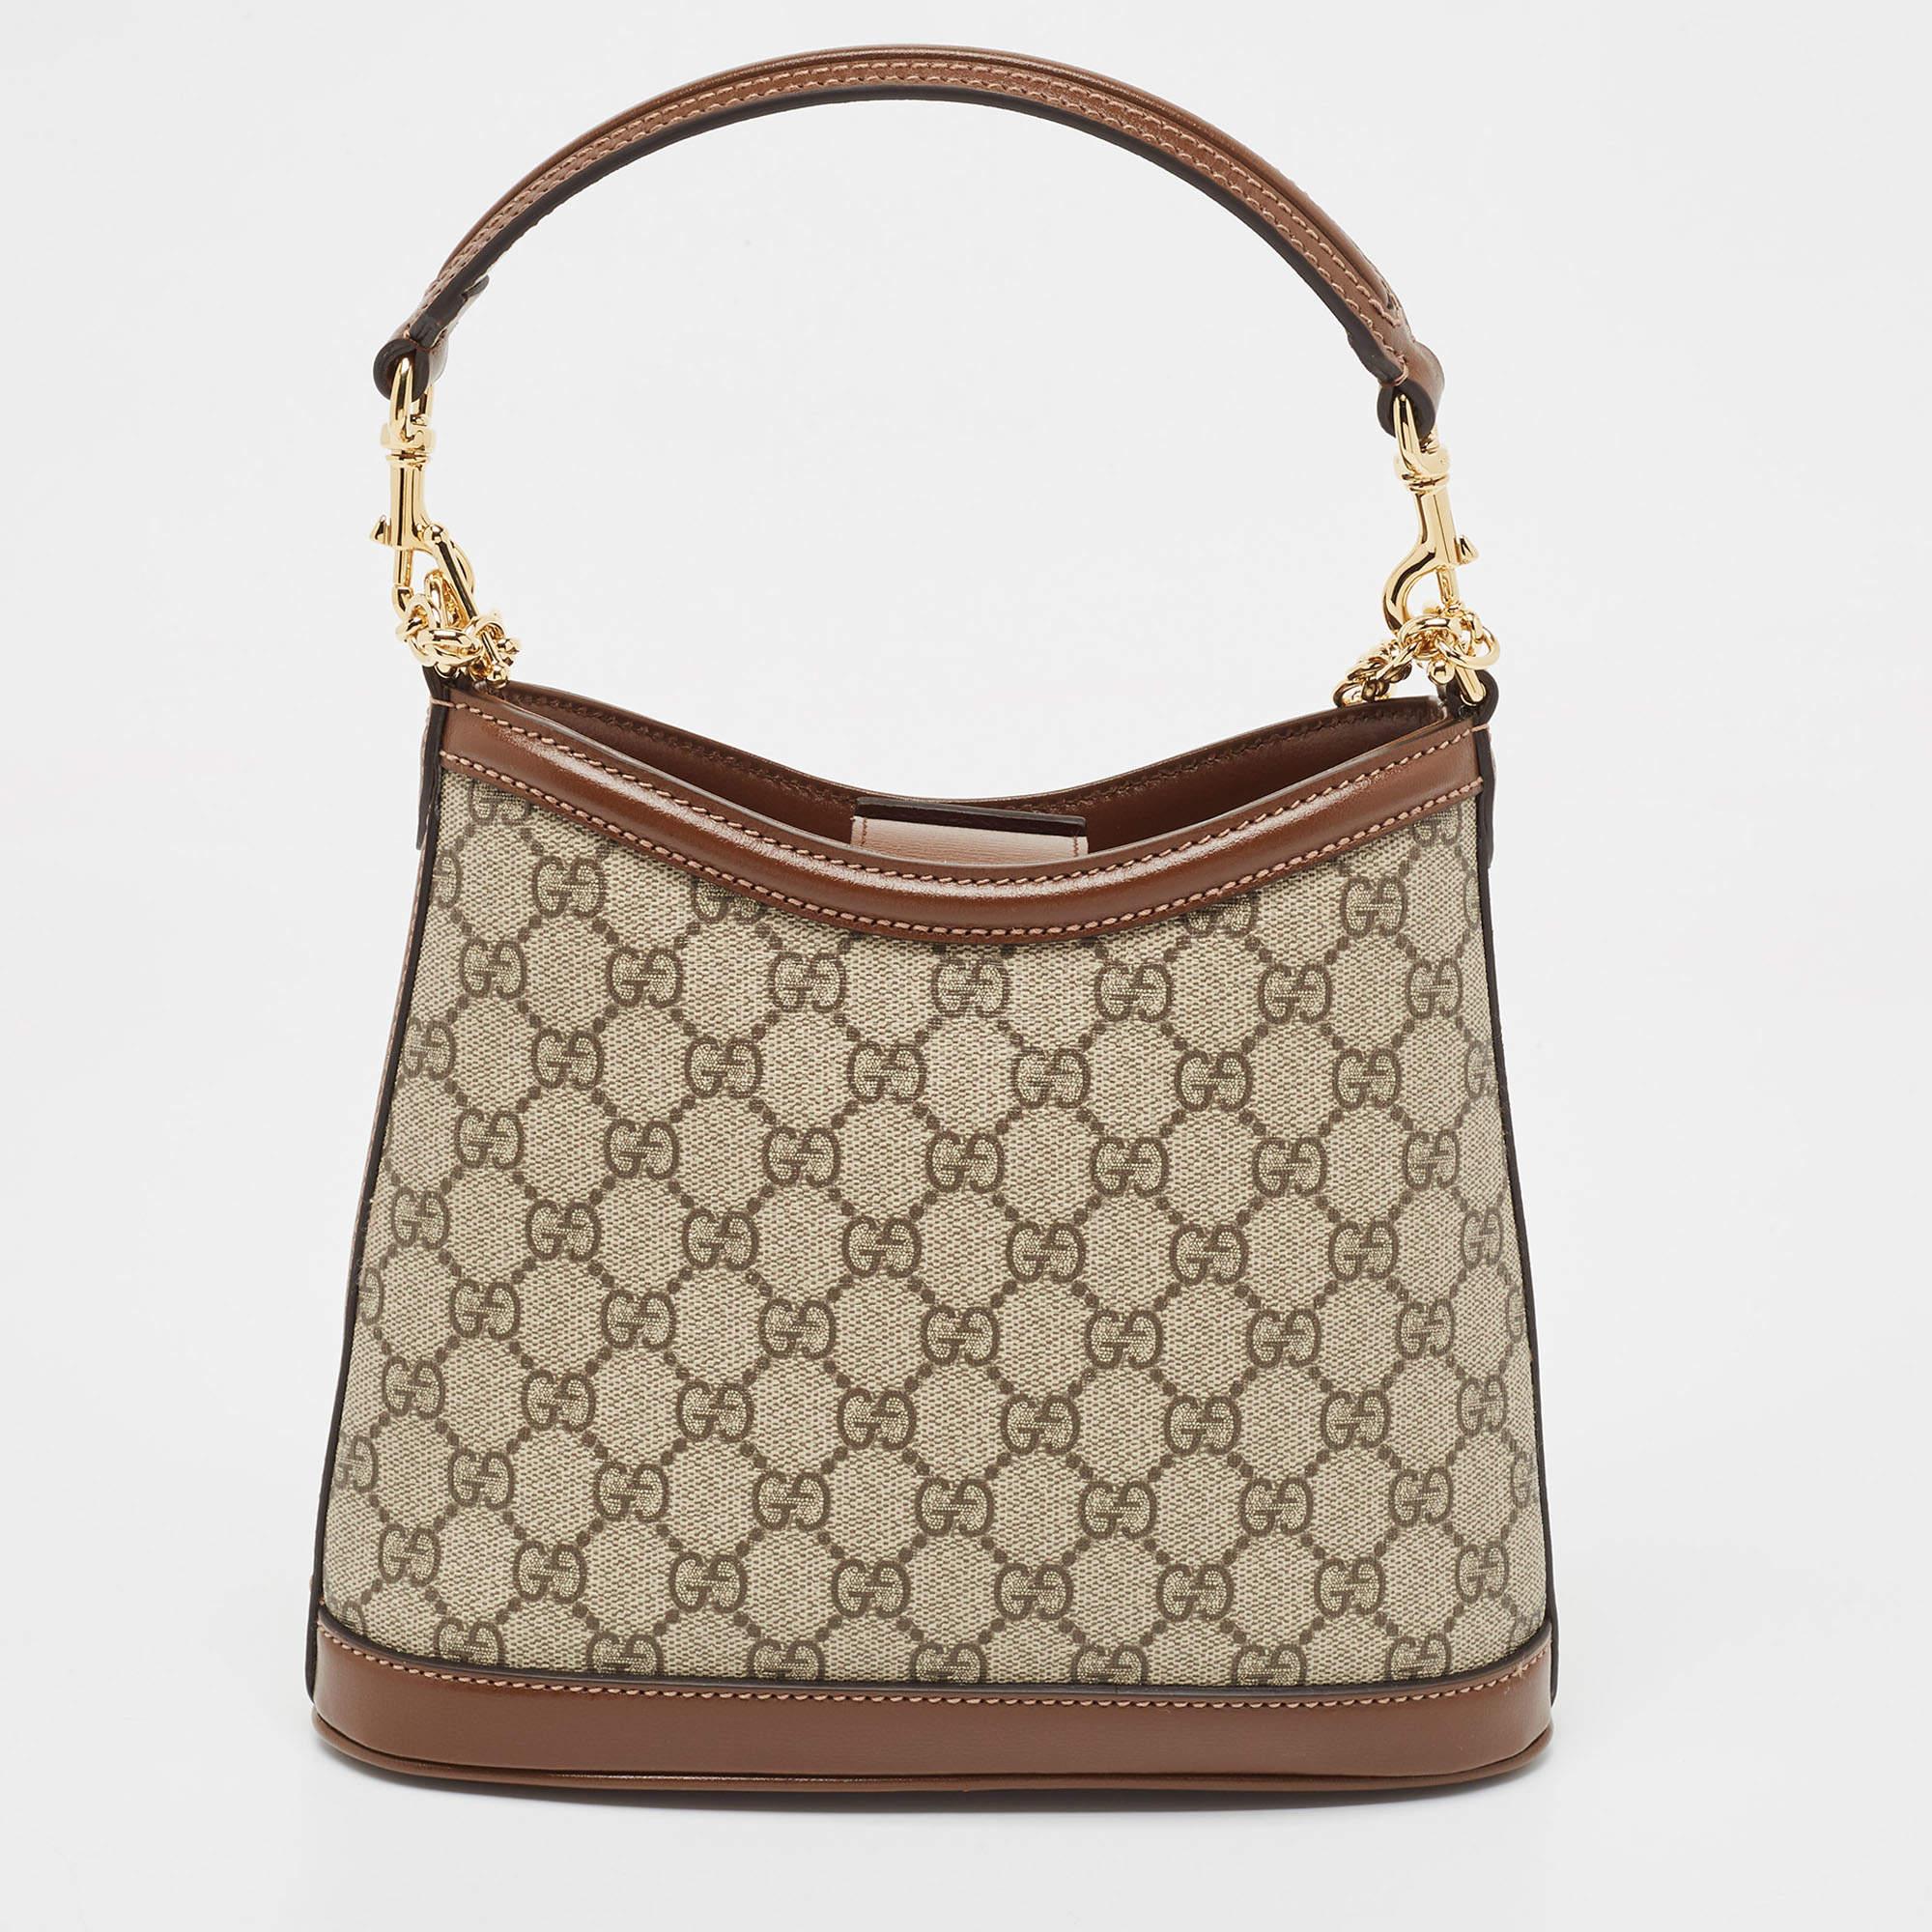 Indulge in timeless luxury with this Gucci bag for women. Meticulously crafted, this exquisite accessory embodies elegance, functionality, and style, making it the ultimate companion for every sophisticated woman.

Includes: Original Dustbag, Info